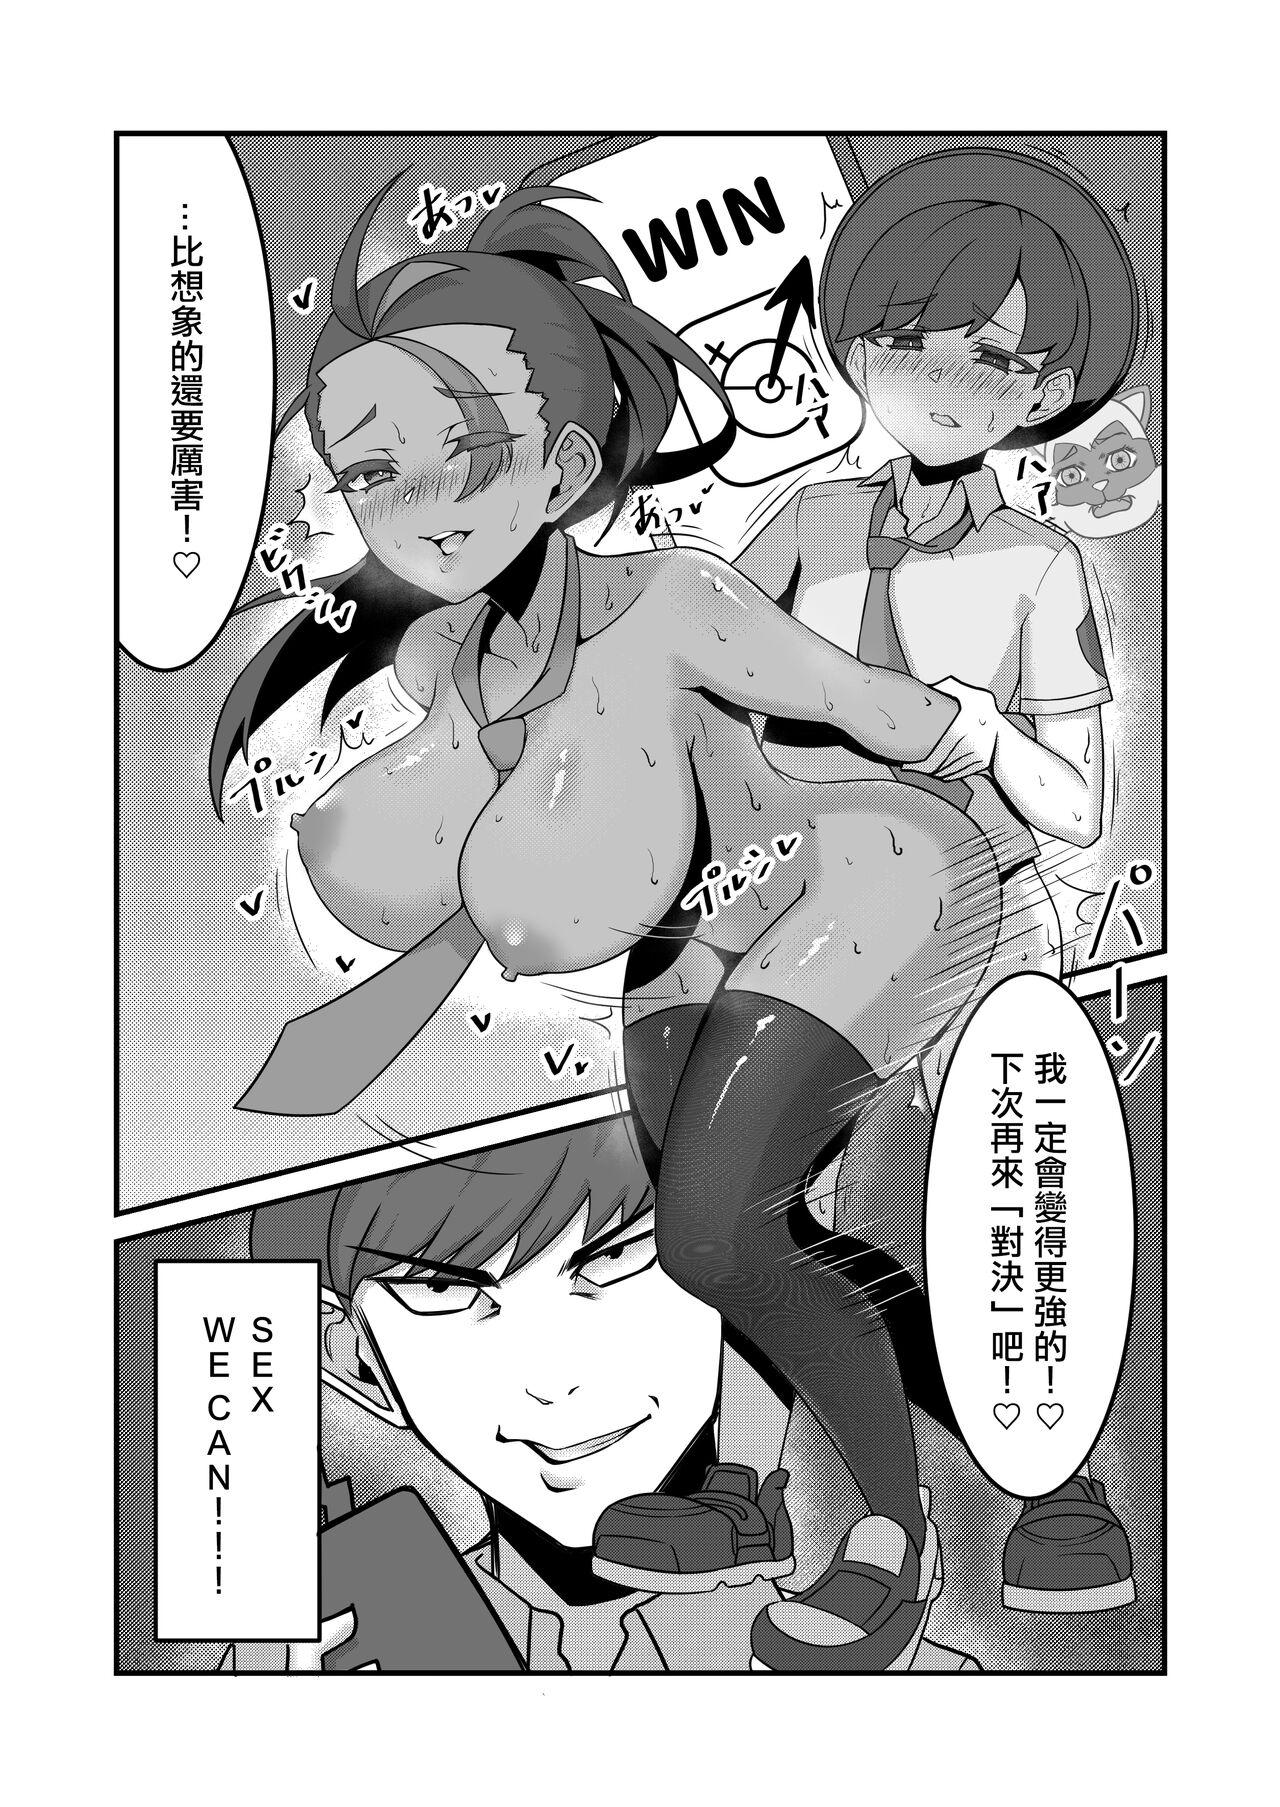 Female Domination [KuQ] Sex after Versus - Katy Hen 1 | Sex after Versus - 阿楓① [Chinese] - Pokemon | pocket monsters Amature Sex Tapes - Page 5